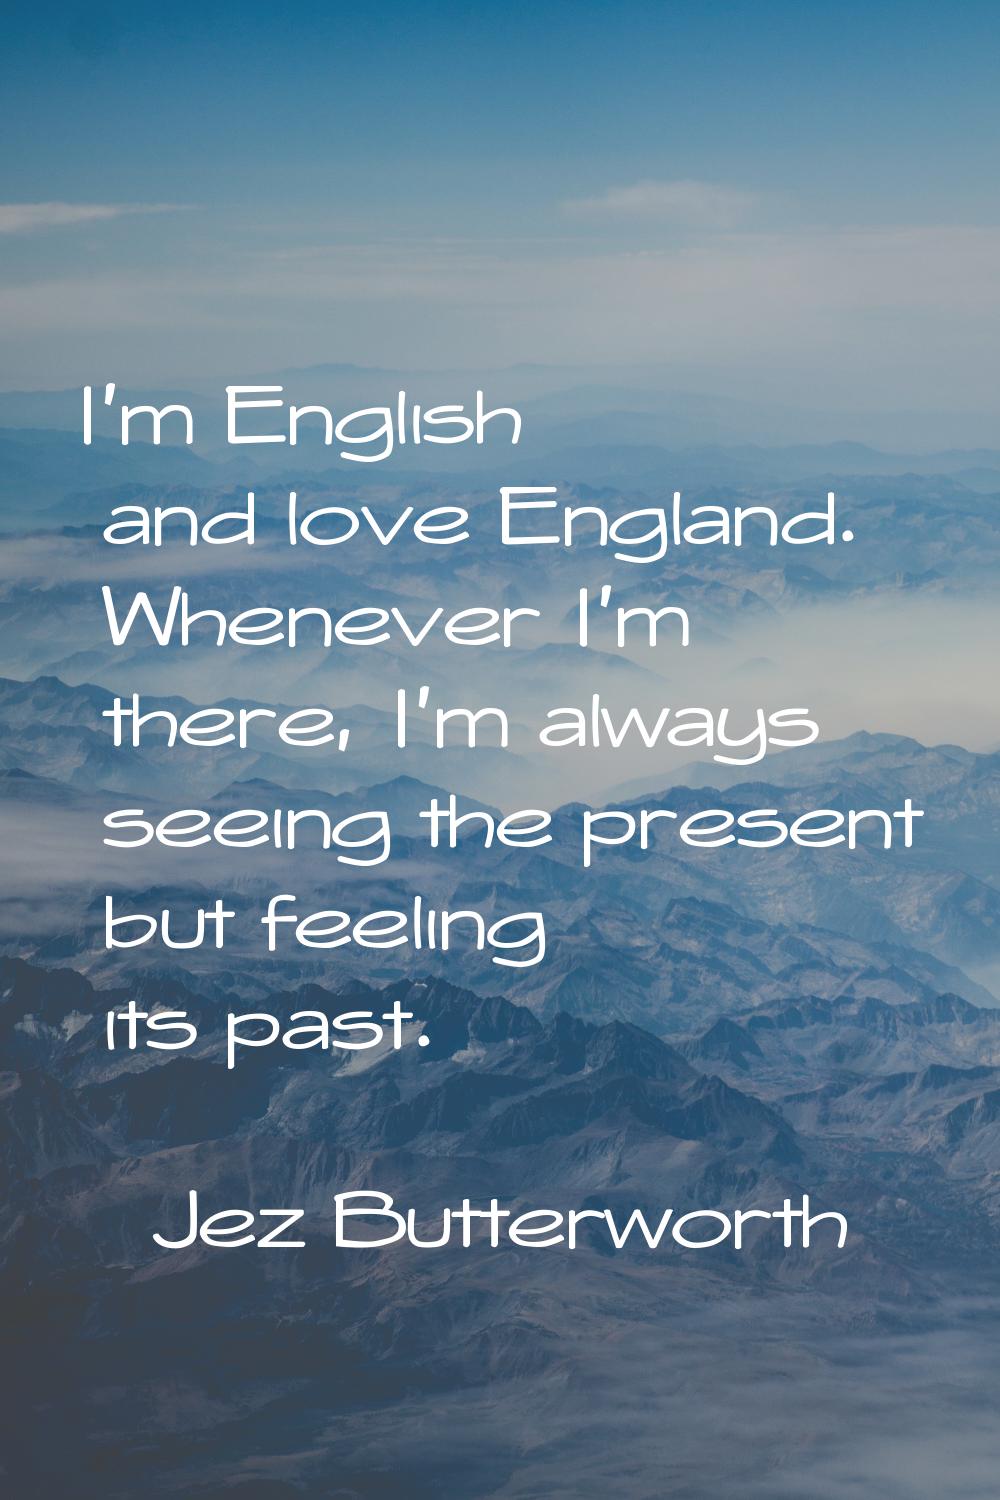 I'm English and love England. Whenever I'm there, I'm always seeing the present but feeling its pas